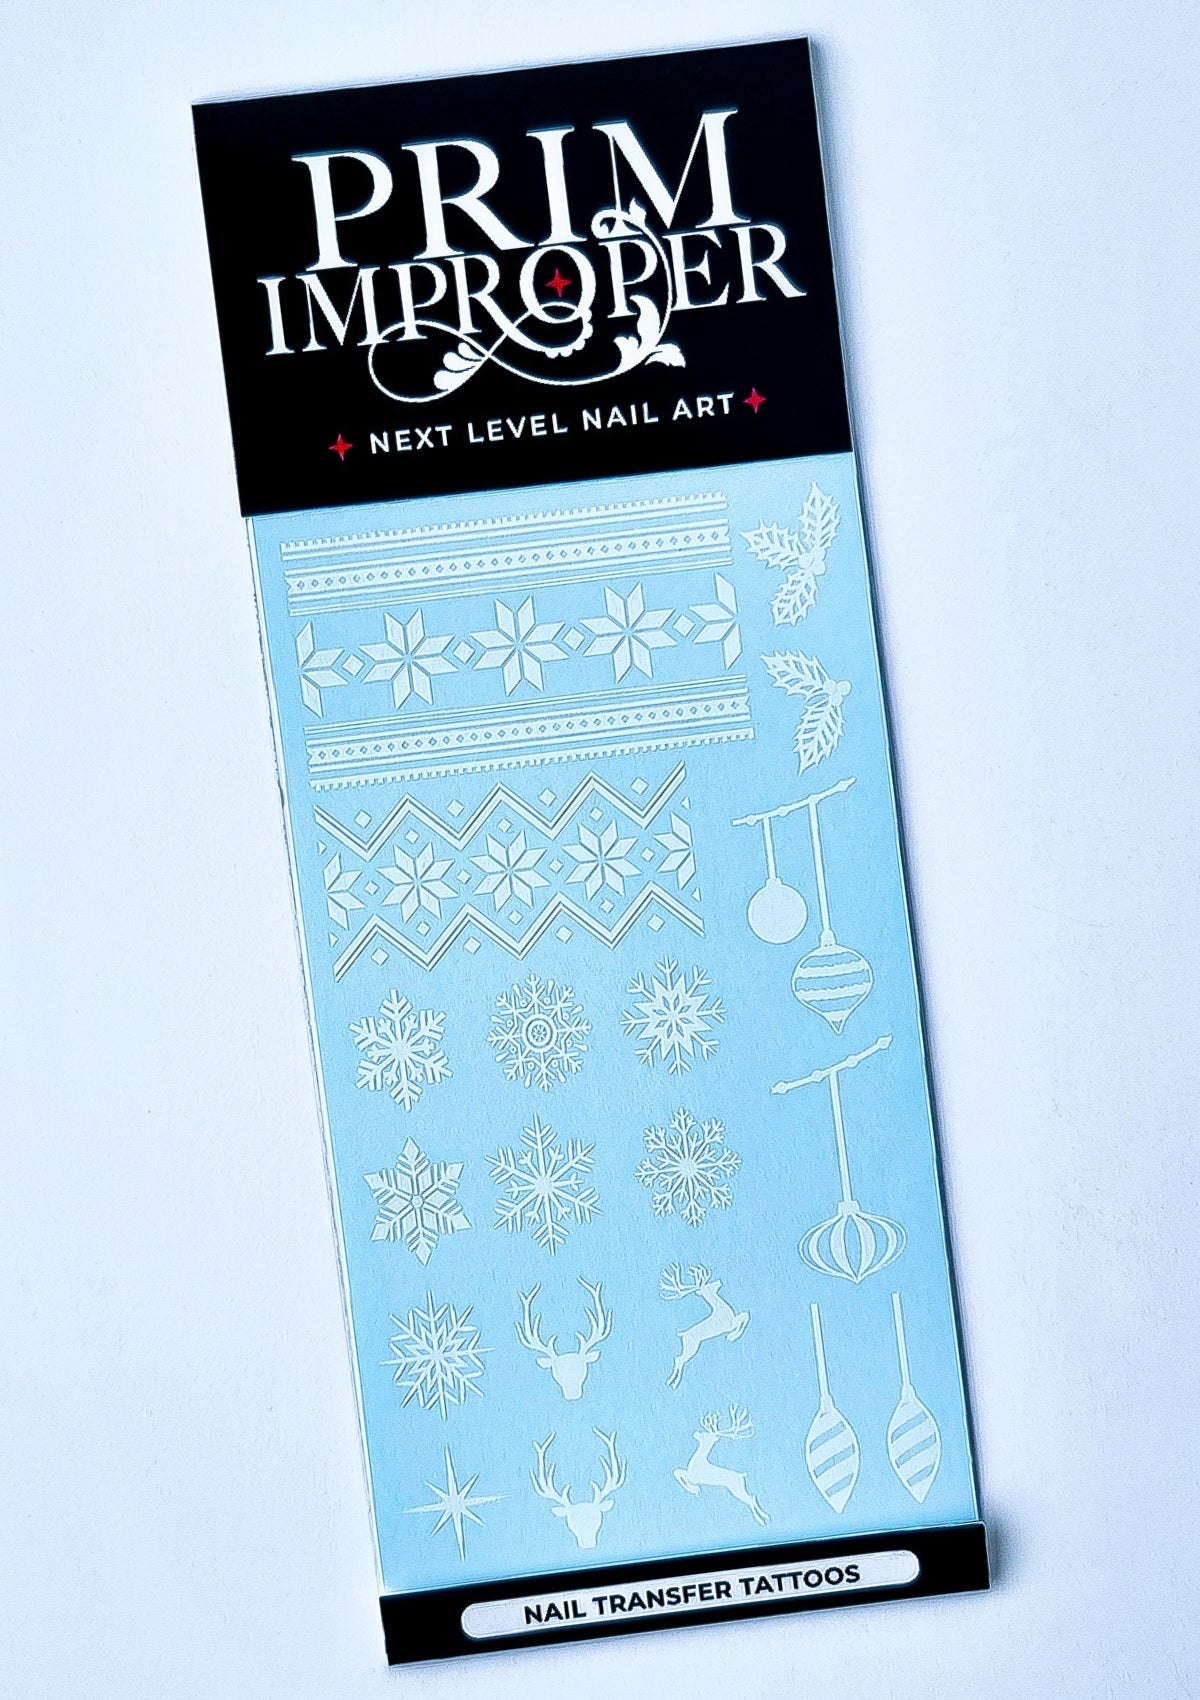 Sheet of white Christmas Nail Transfer Tattoos featuring Nordic sweater patterns, snowflakes, holly, reindeer, stars and Christmas baubles.